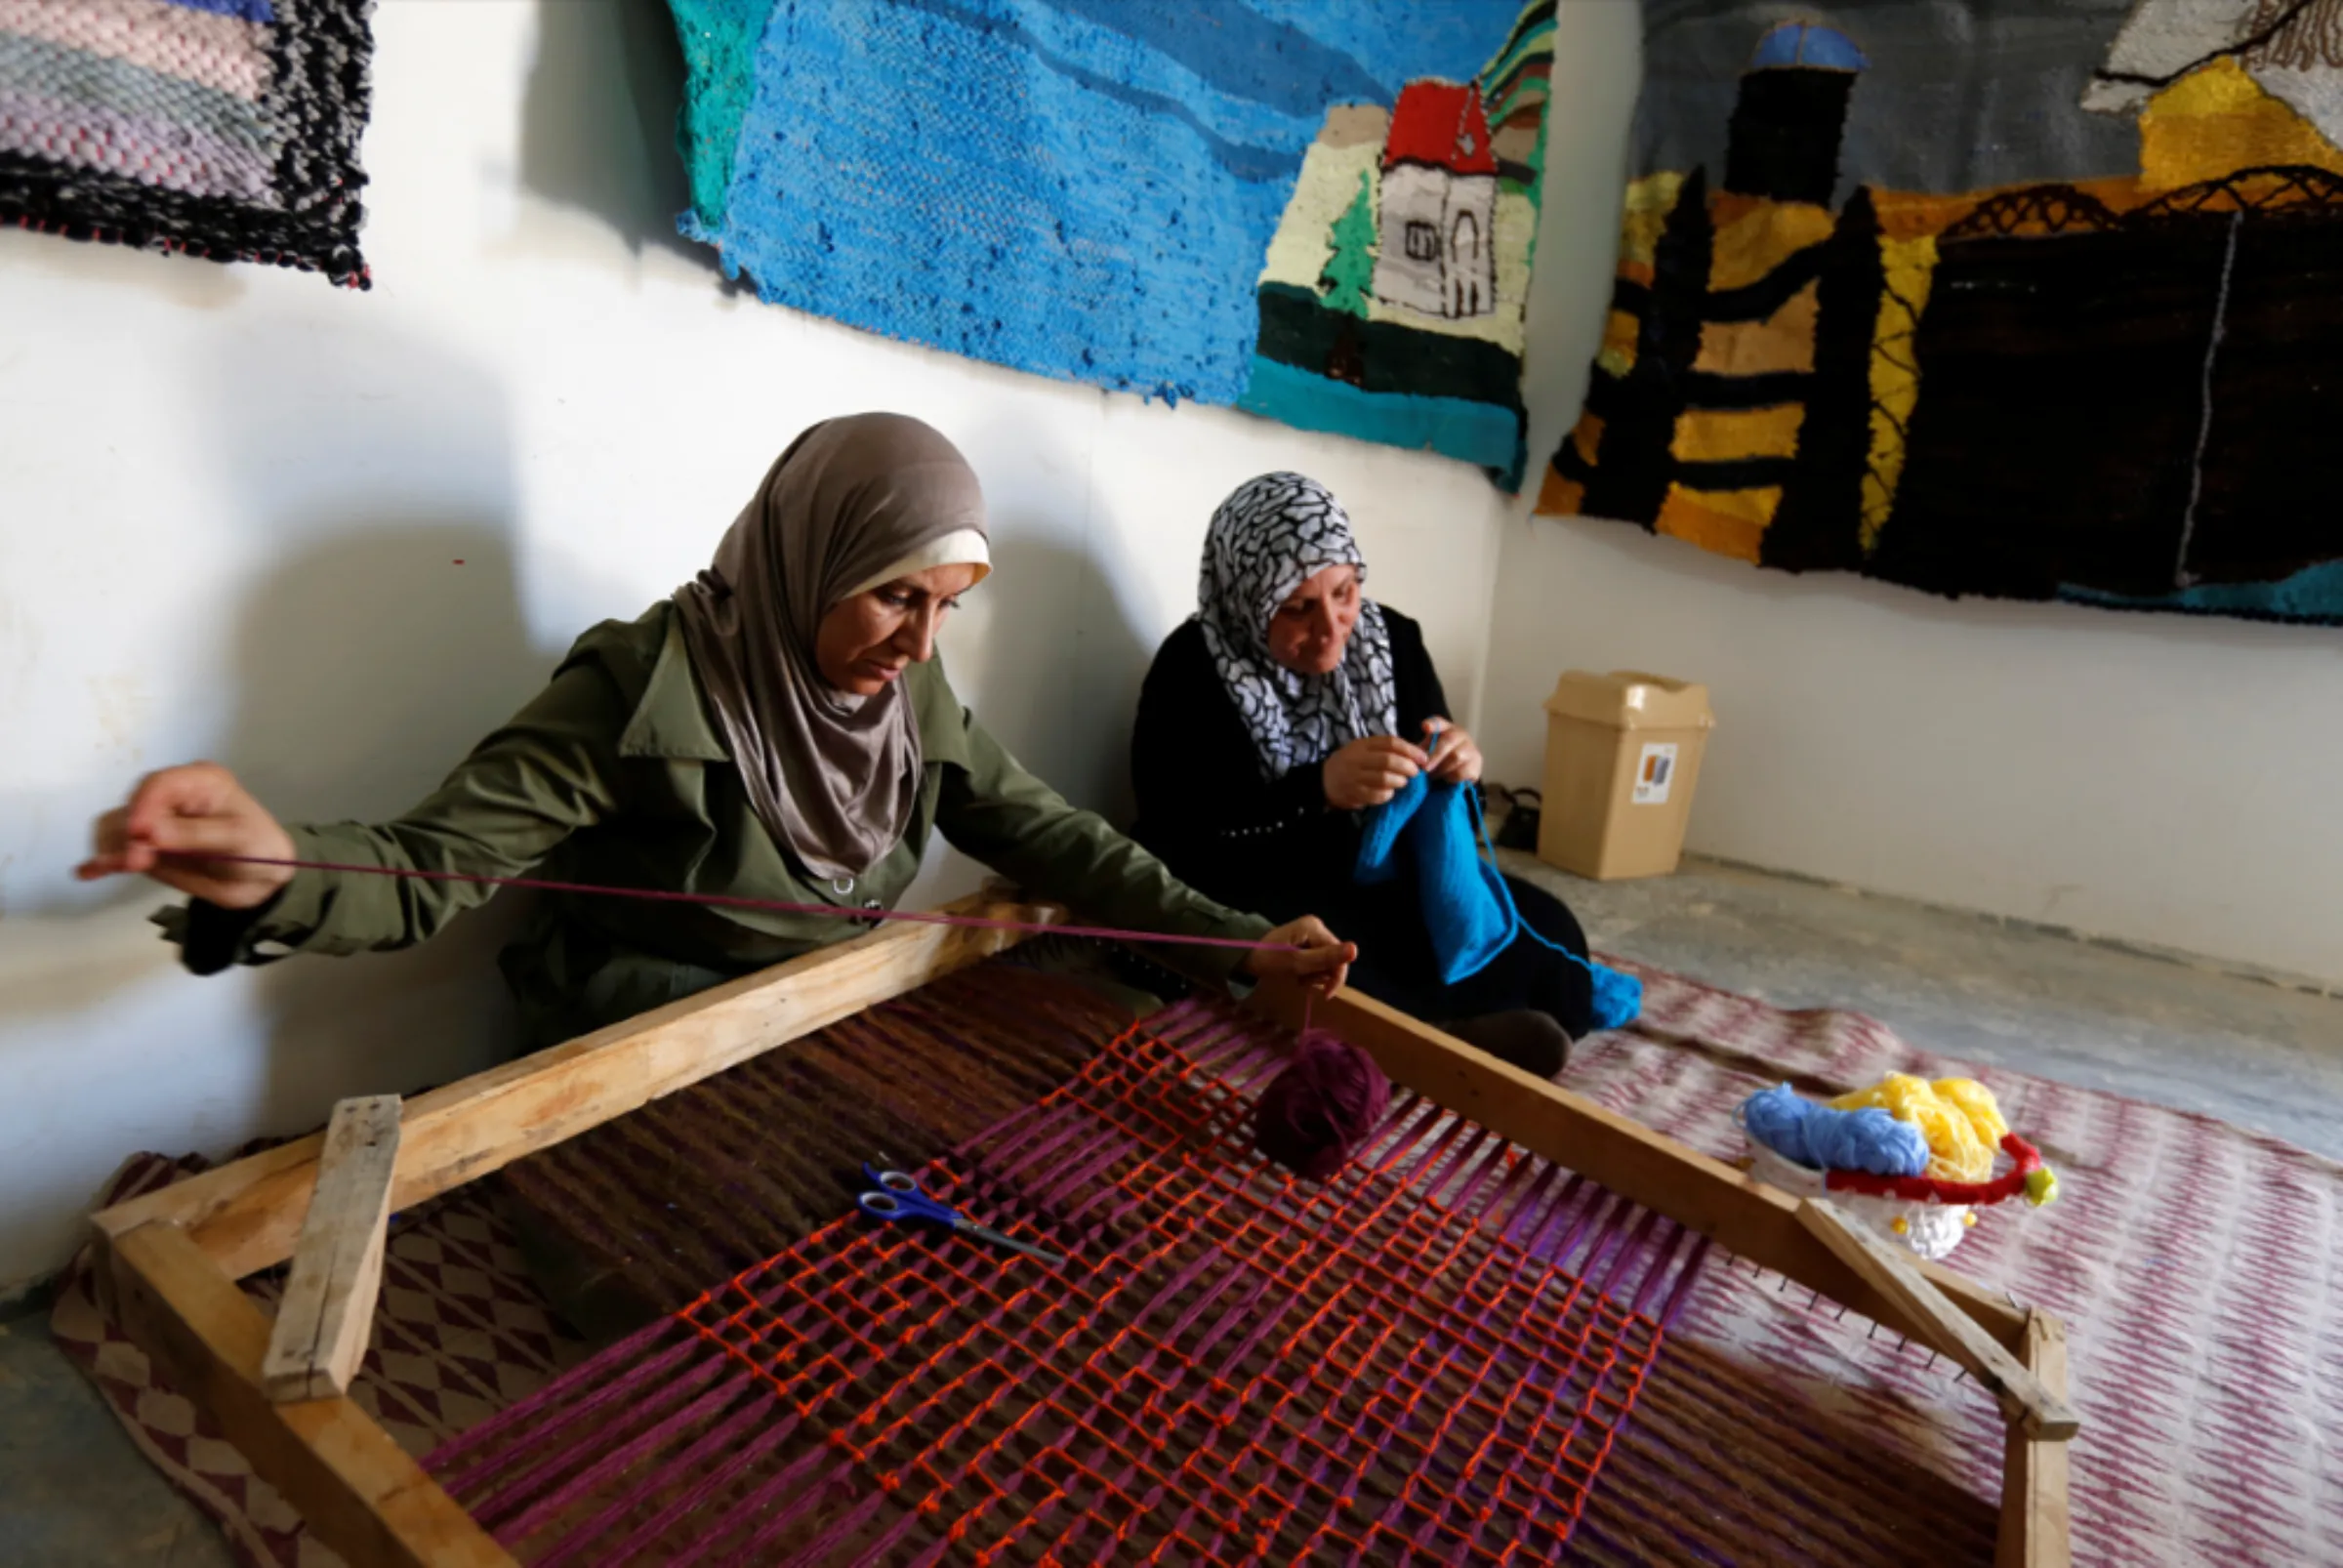 A Syrian woman weaves wool as a colleague knits a baby shawl at a shelter for women built by Italian NGO Building Peace Foundation and run by UN Women at Al Zaatari refugee camp outside the city of Mafraq in Jordan, near the border with Syria, July 17, 2017